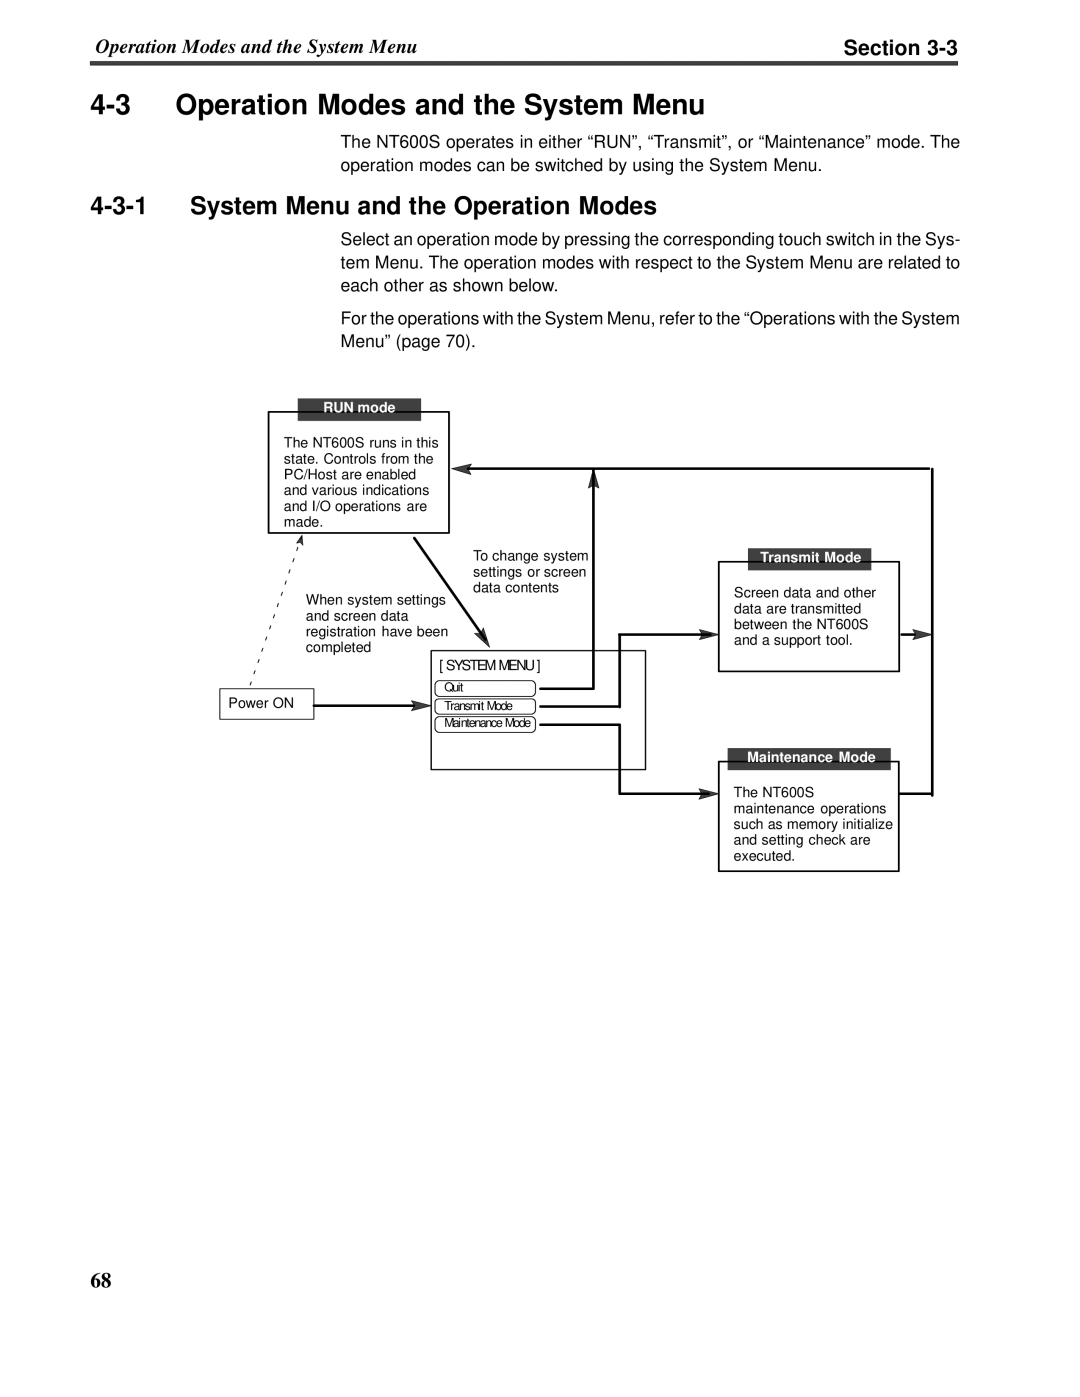 Omron V022-E3-1 operation manual 4-3Operation Modes and the System Menu, 4-3-1System Menu and the Operation Modes, Section 